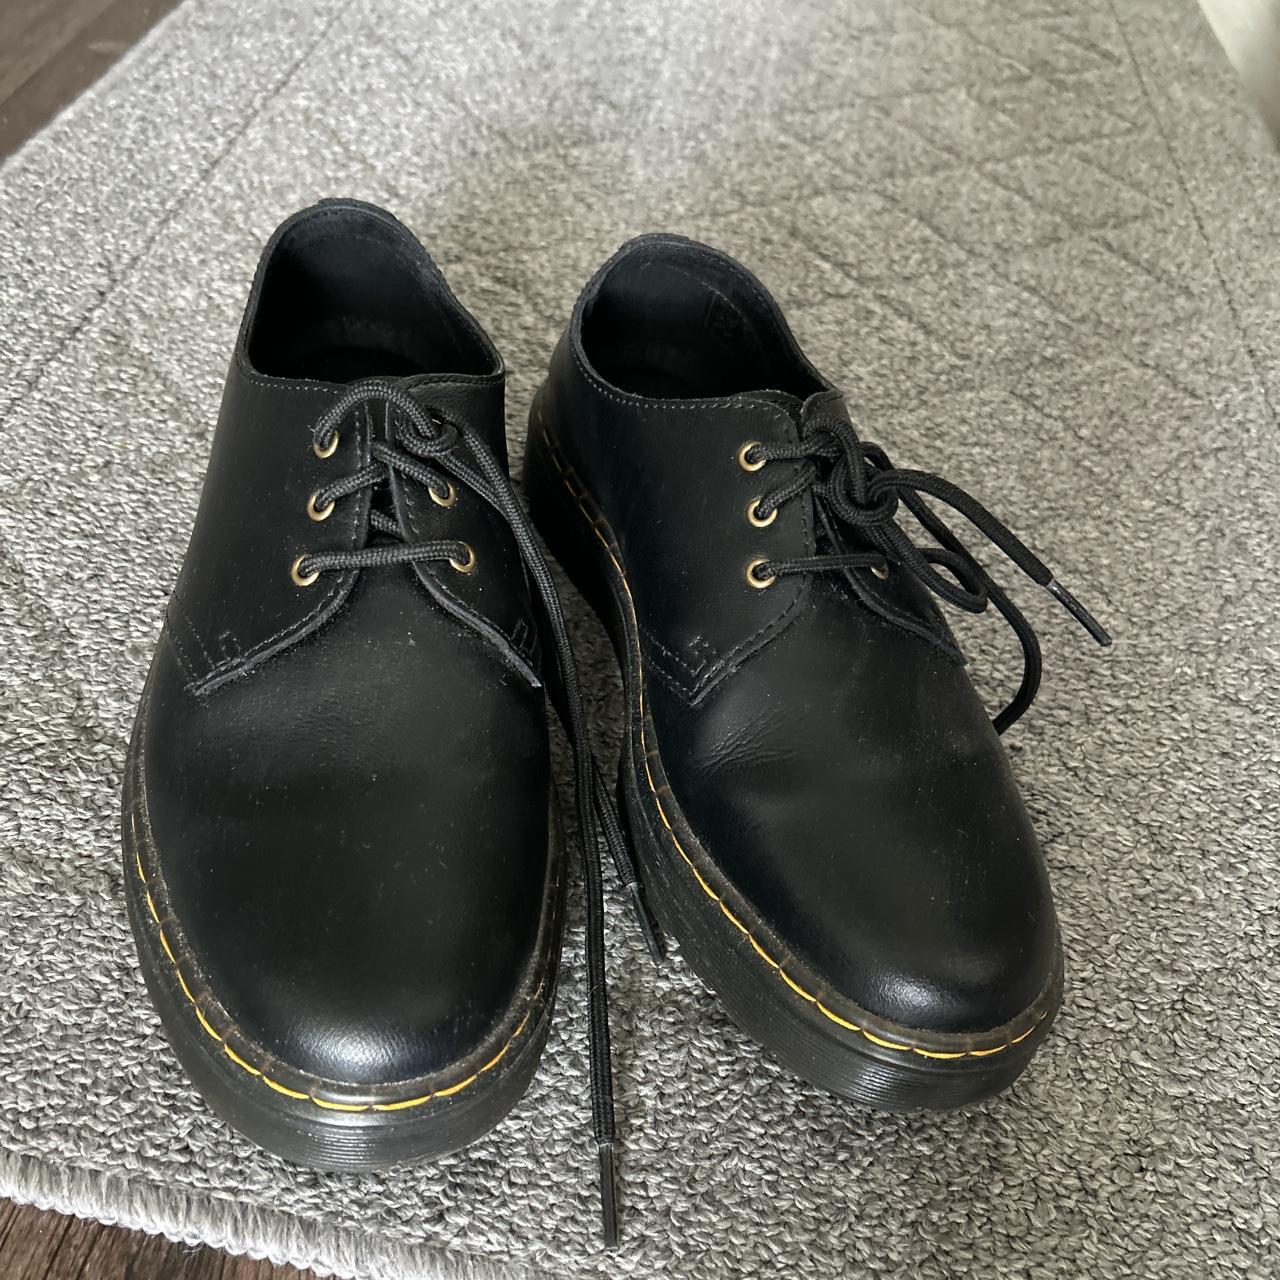 Dr. Martens Zavala Oxford shoes. Worn only twice but... - Depop